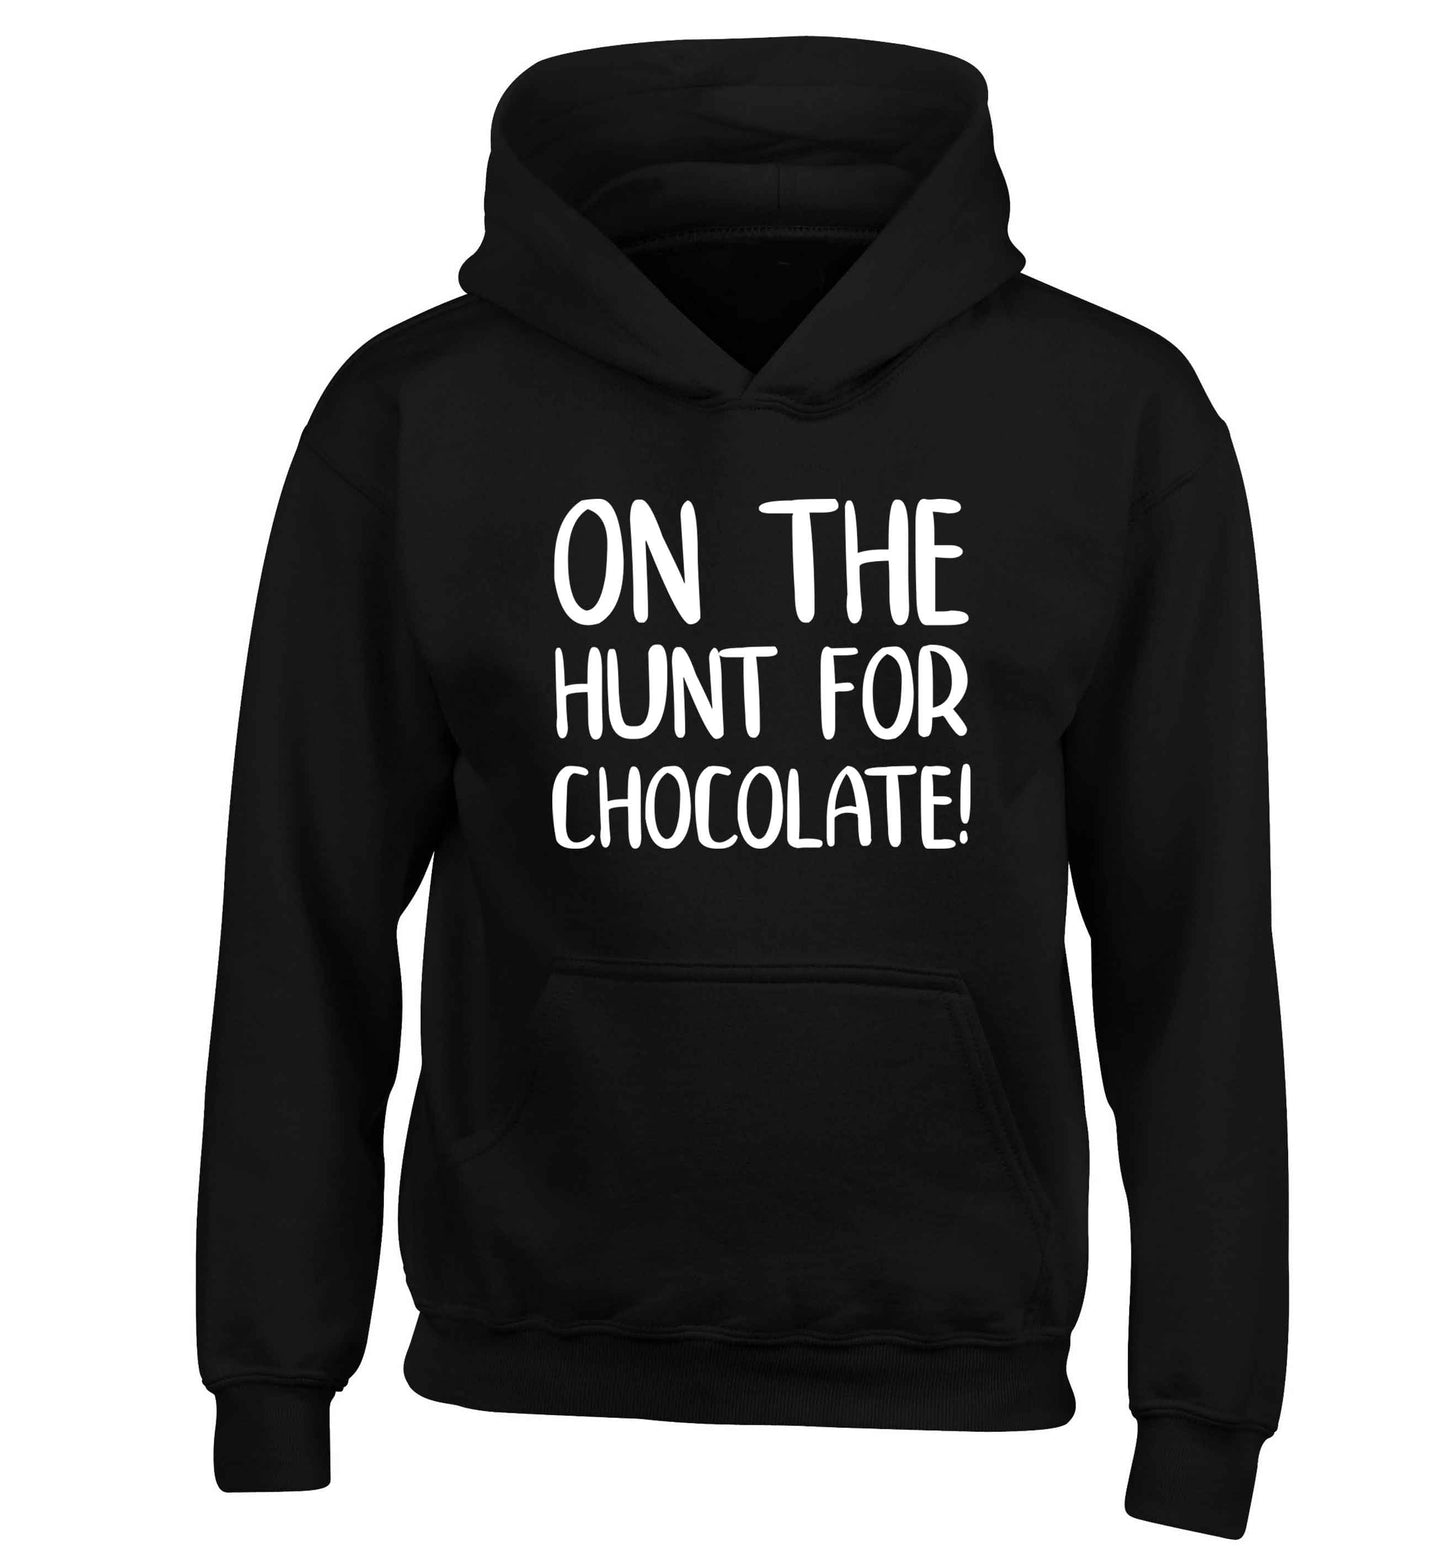 On the hunt for chocolate! children's black hoodie 12-13 Years